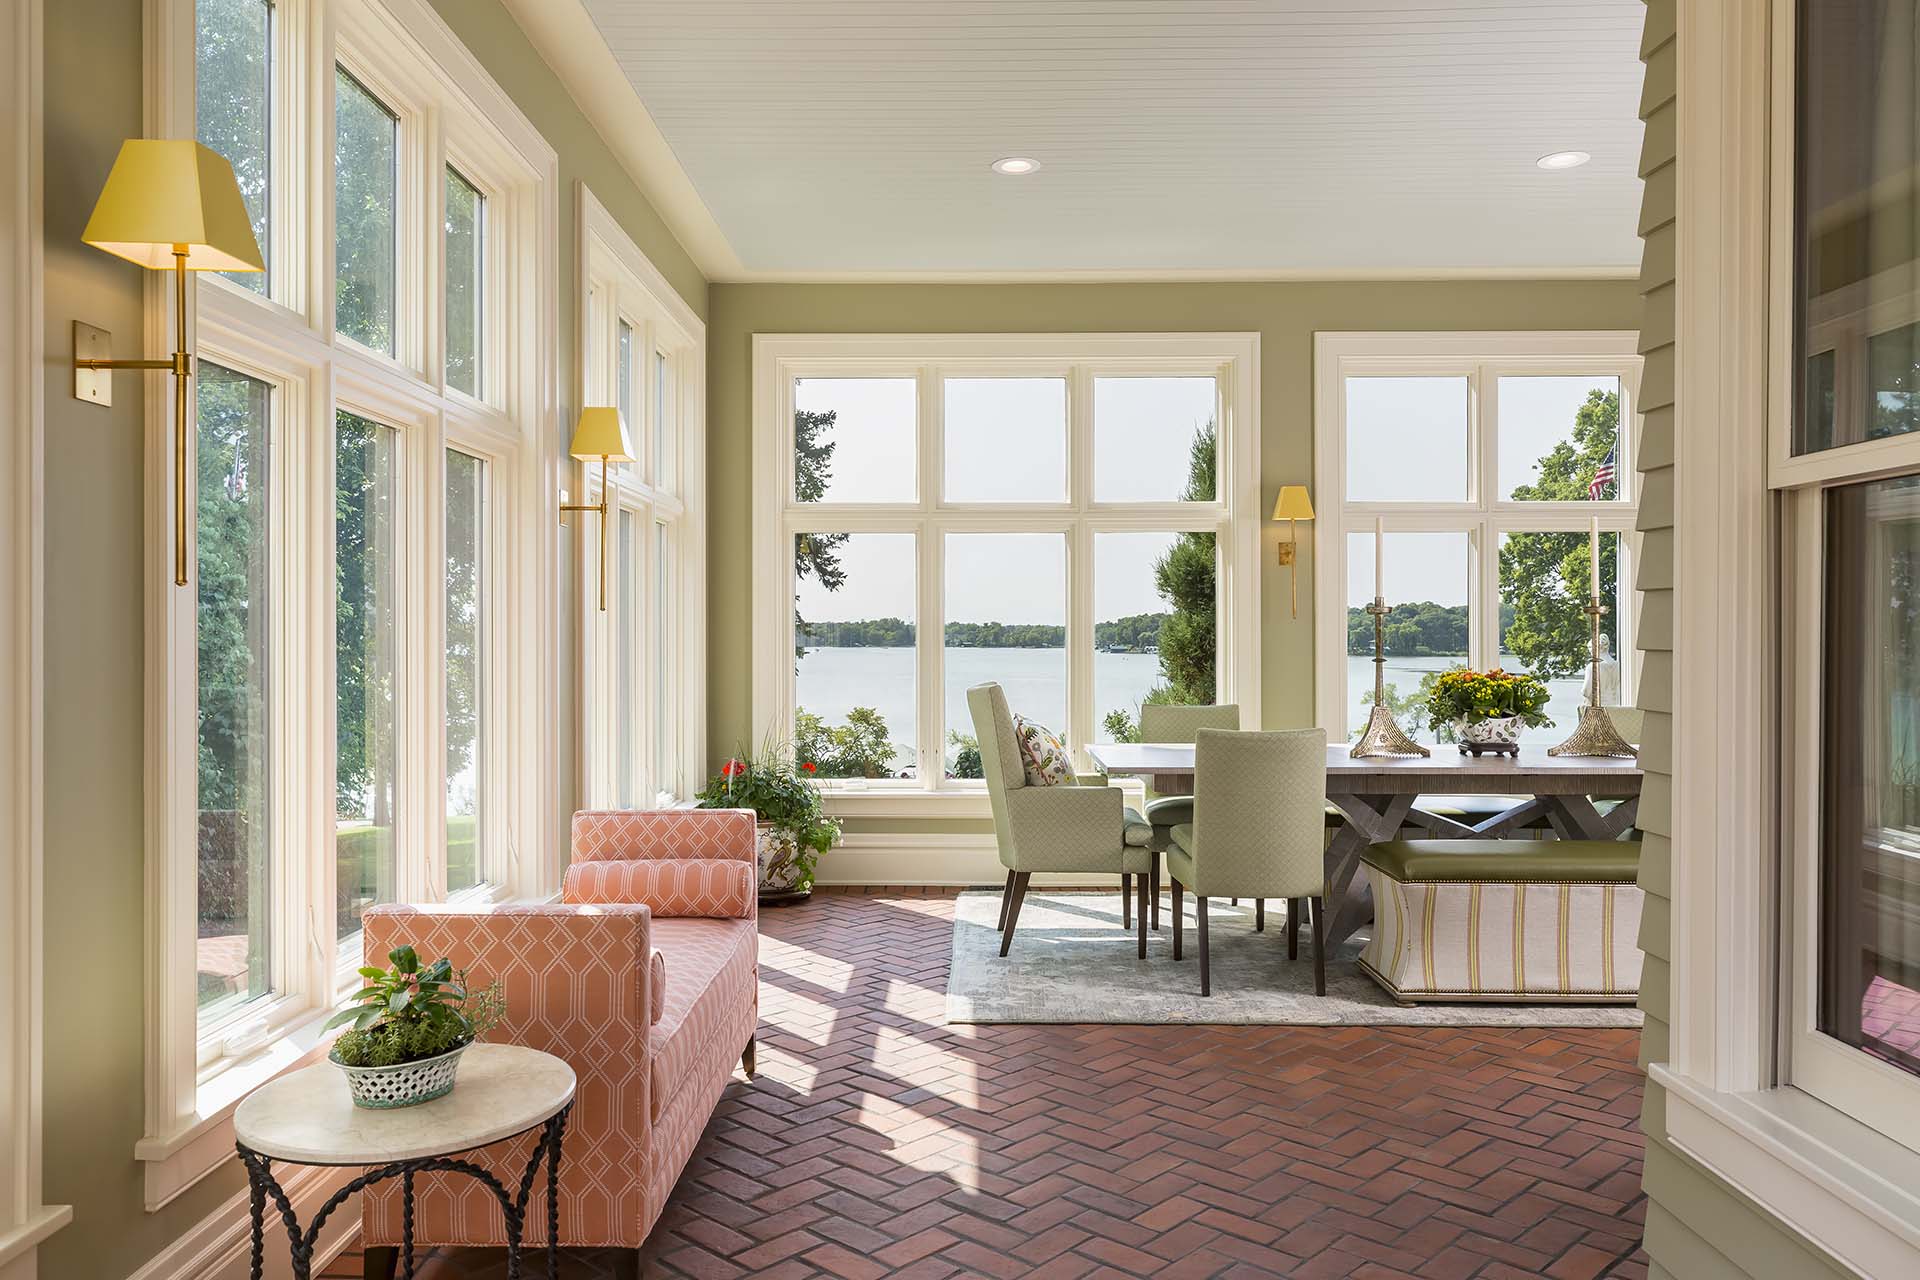 Four season porch with heated brick floors and views of the lake